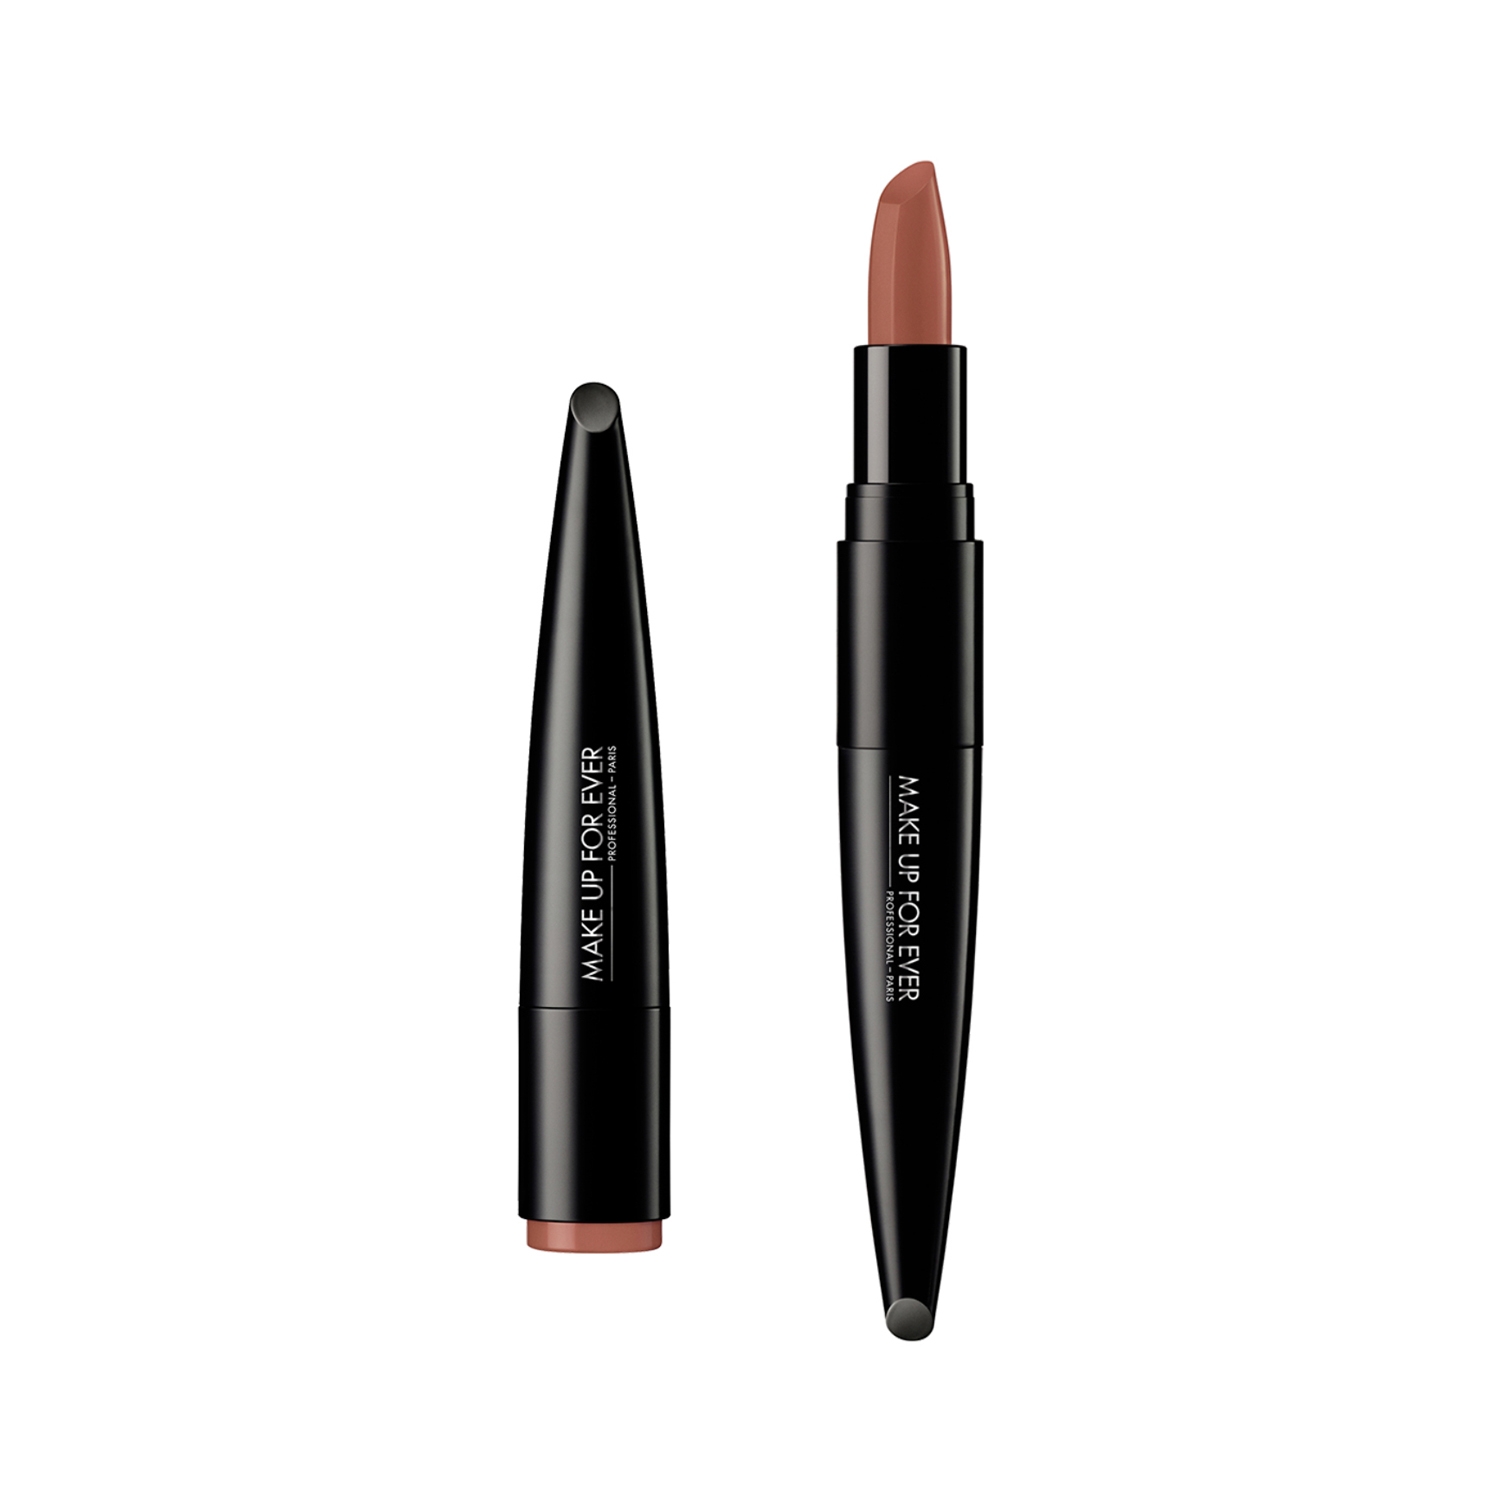 Make Up For Ever | Make Up For Ever Rouge Artist-intense Color Beautifying Lipstick - Chic Brick 112 (3.2g)